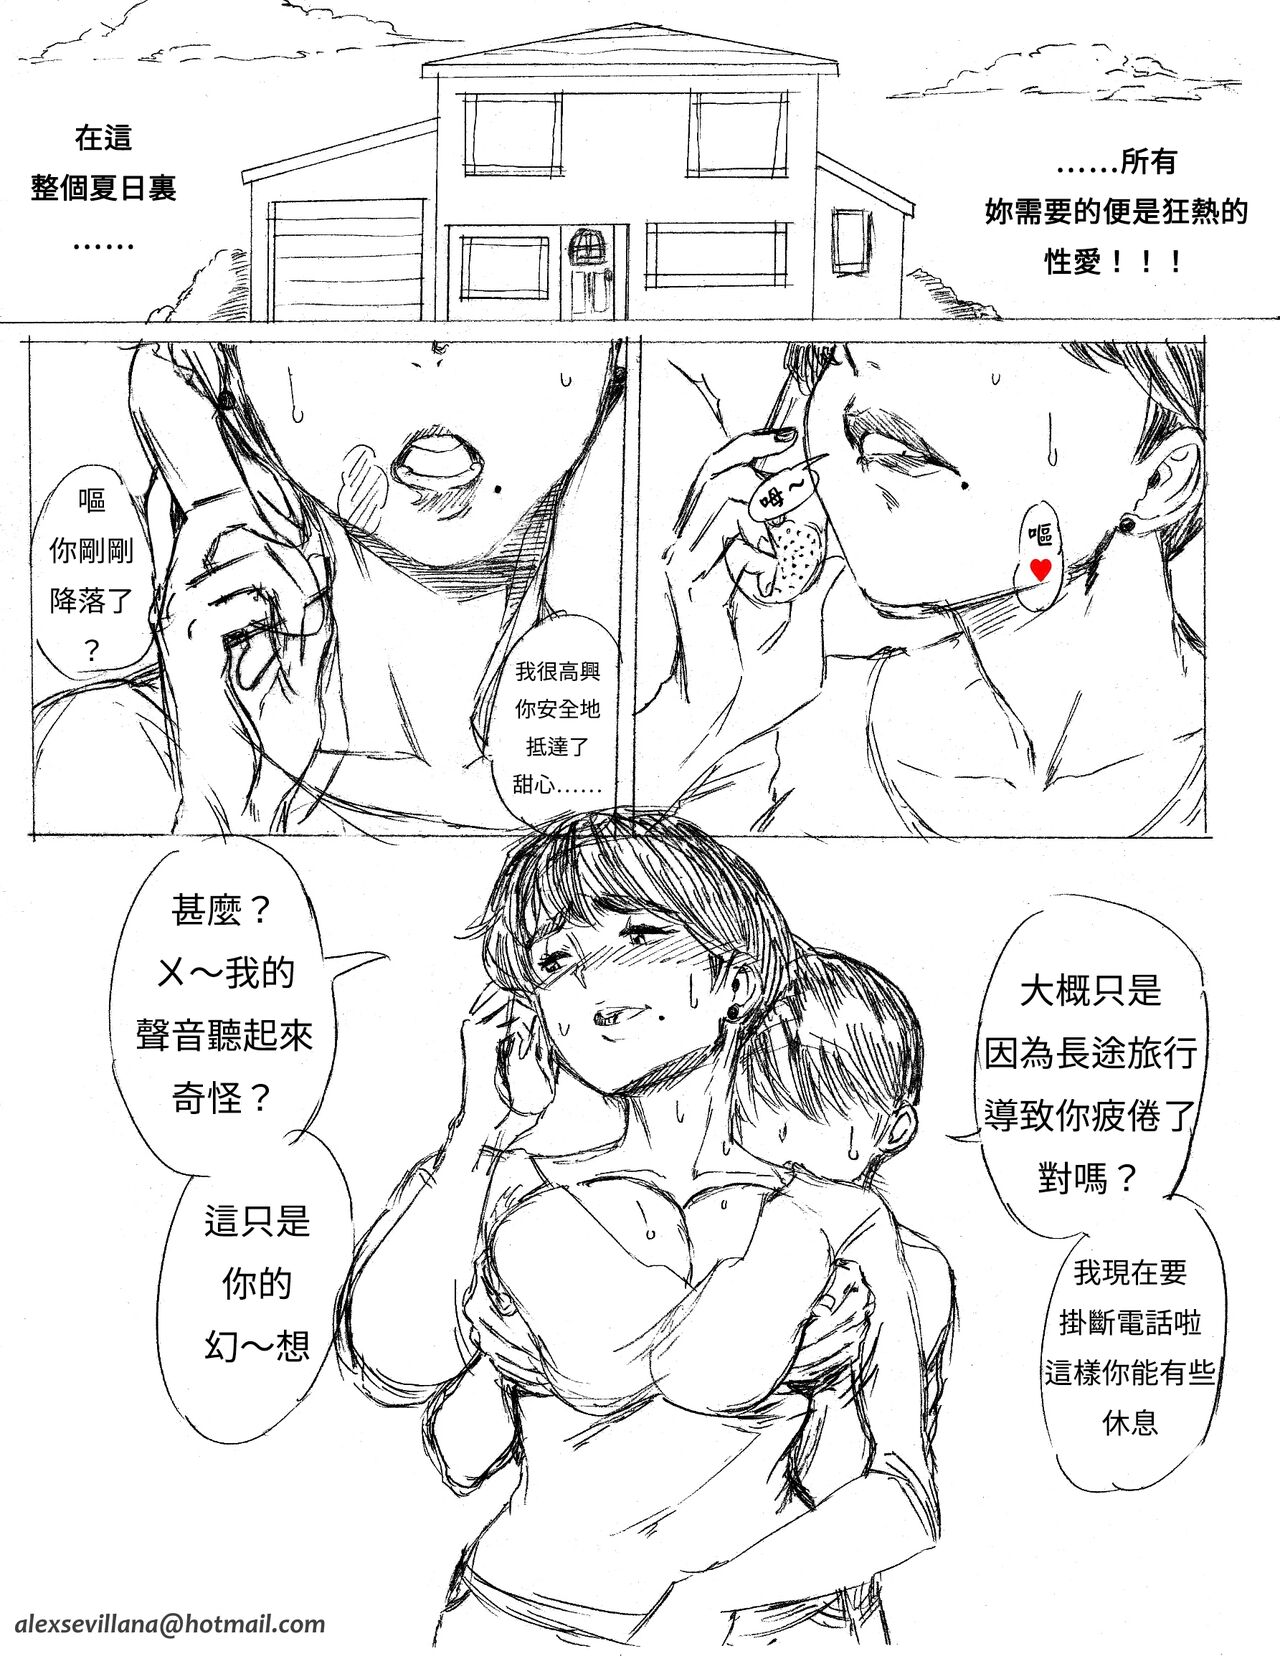 [Aarokira] Mother's Responsibility (Perversion) first draft [Chinese] 